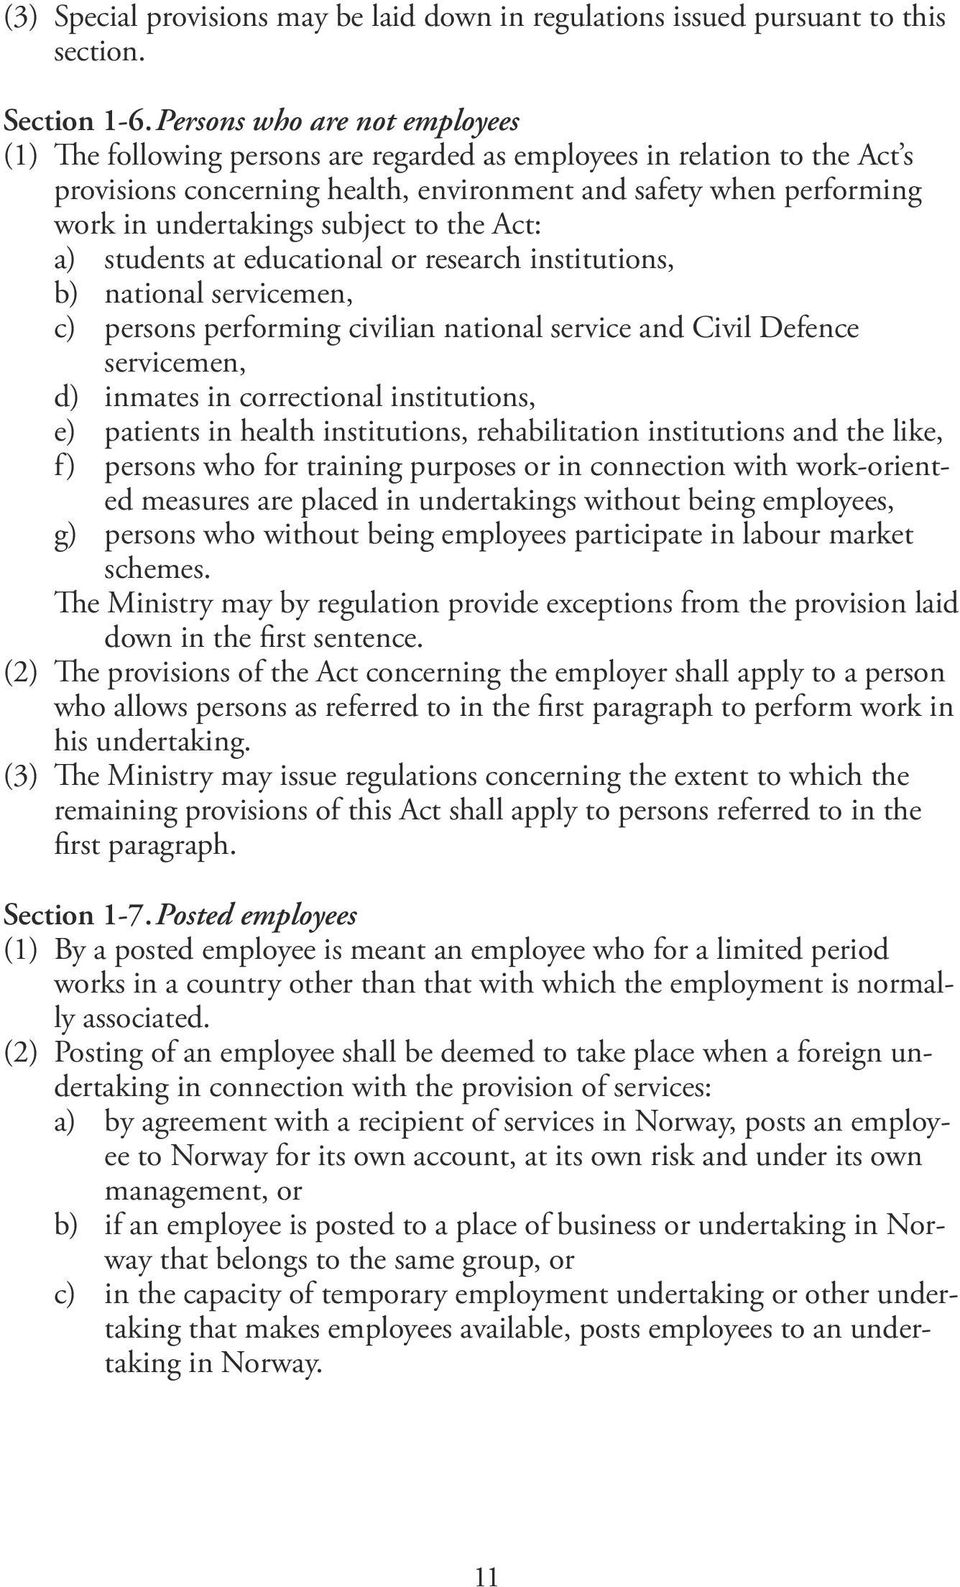 subject to the Act: a) students at educational or research institutions, b) national servicemen, c) persons performing civilian national service and Civil Defence servicemen, d) inmates in